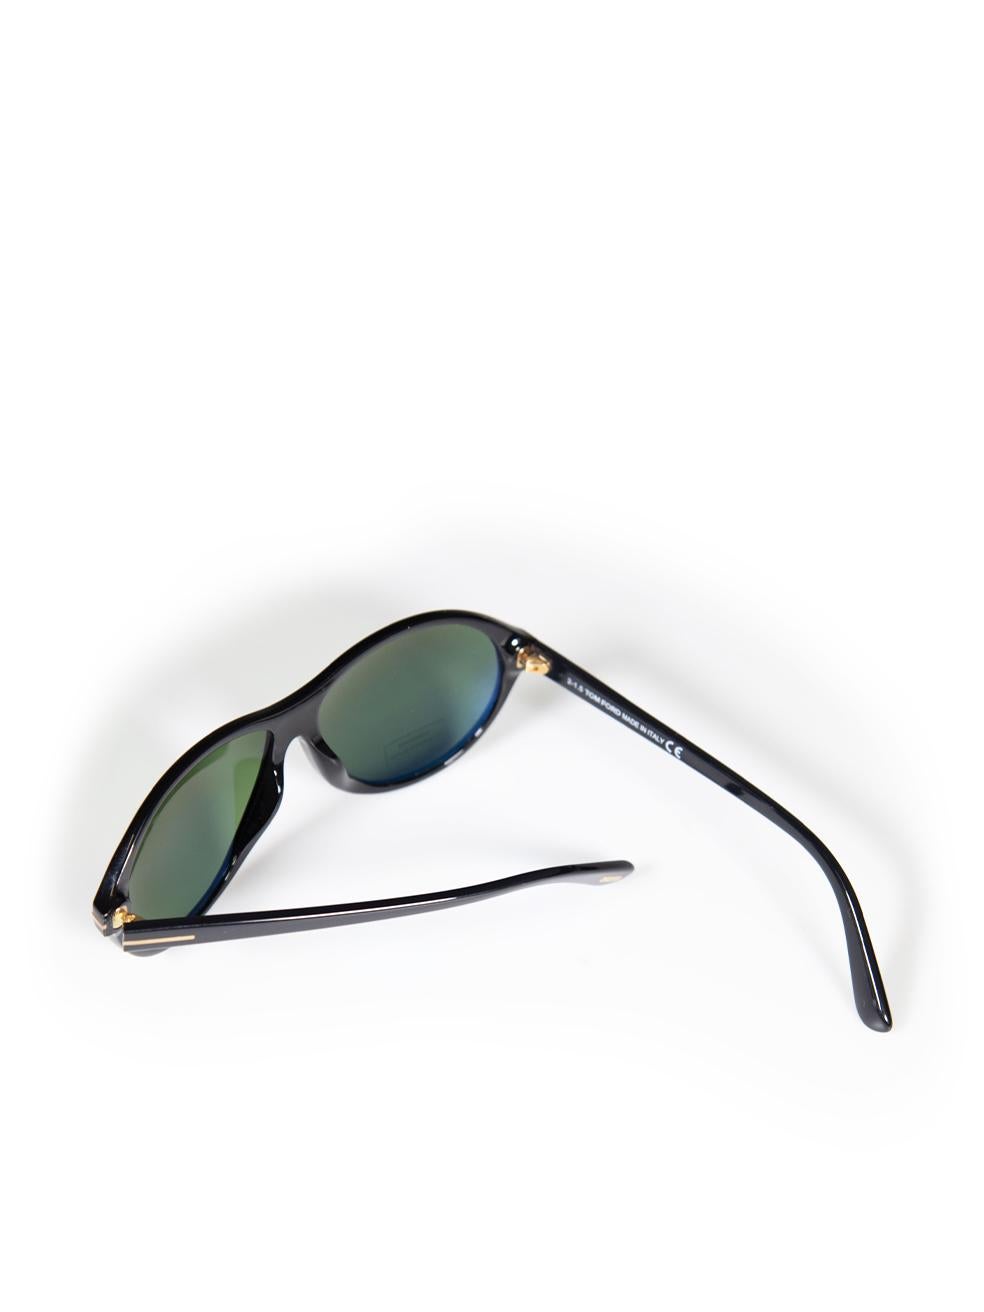 Tom Ford Green Round Tyler Sunglasses For Sale 3